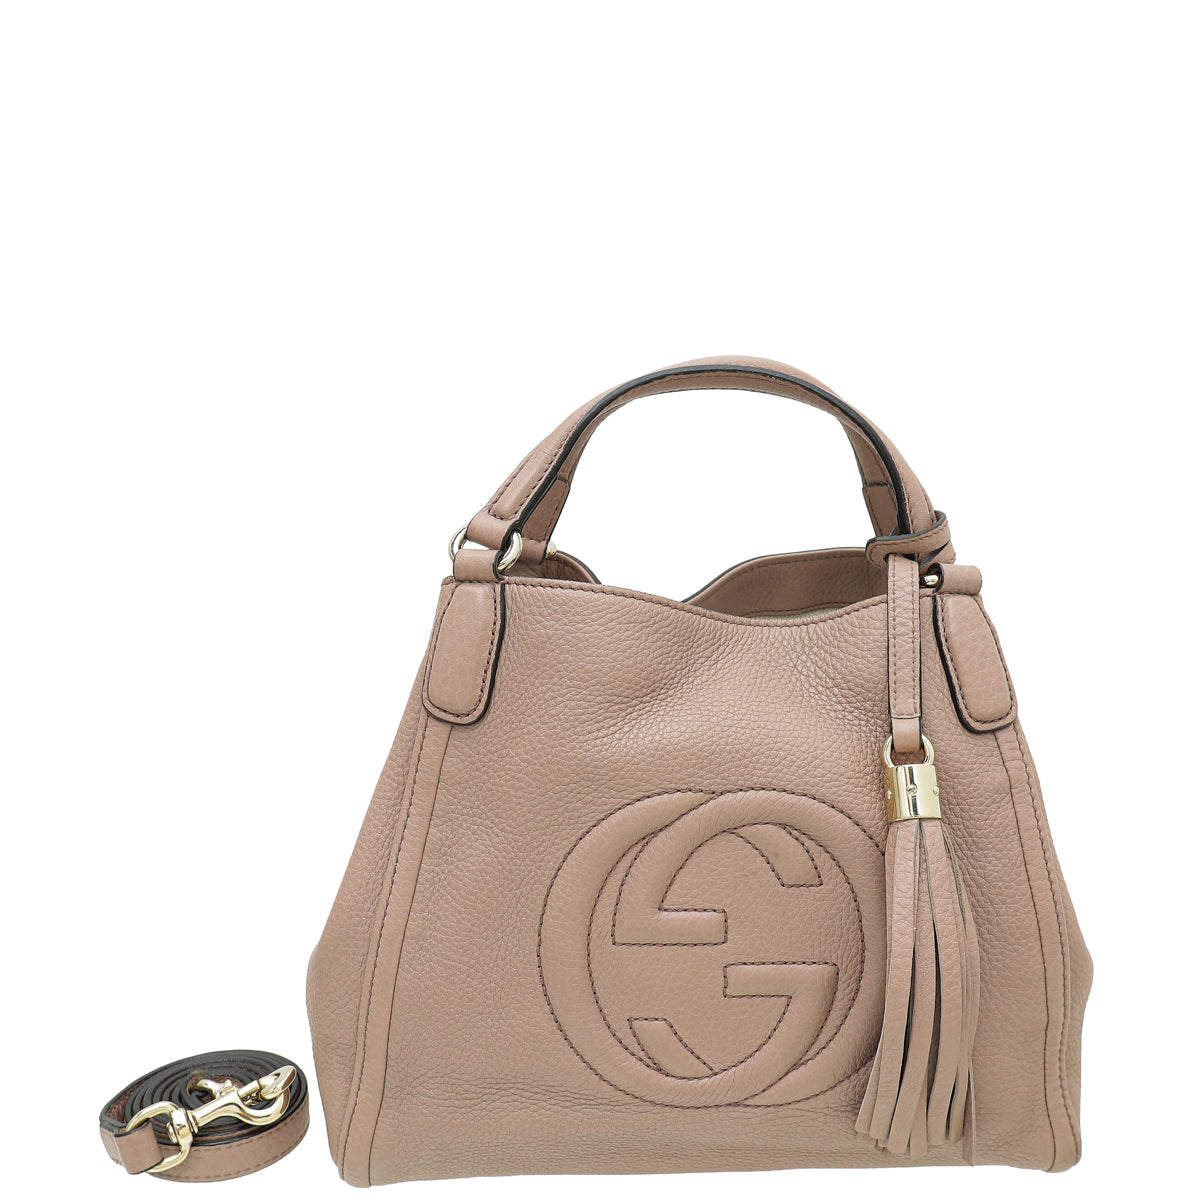 Gucci Dusty Pink Soho Convertible Tote Small Bag - Japan Exclusive